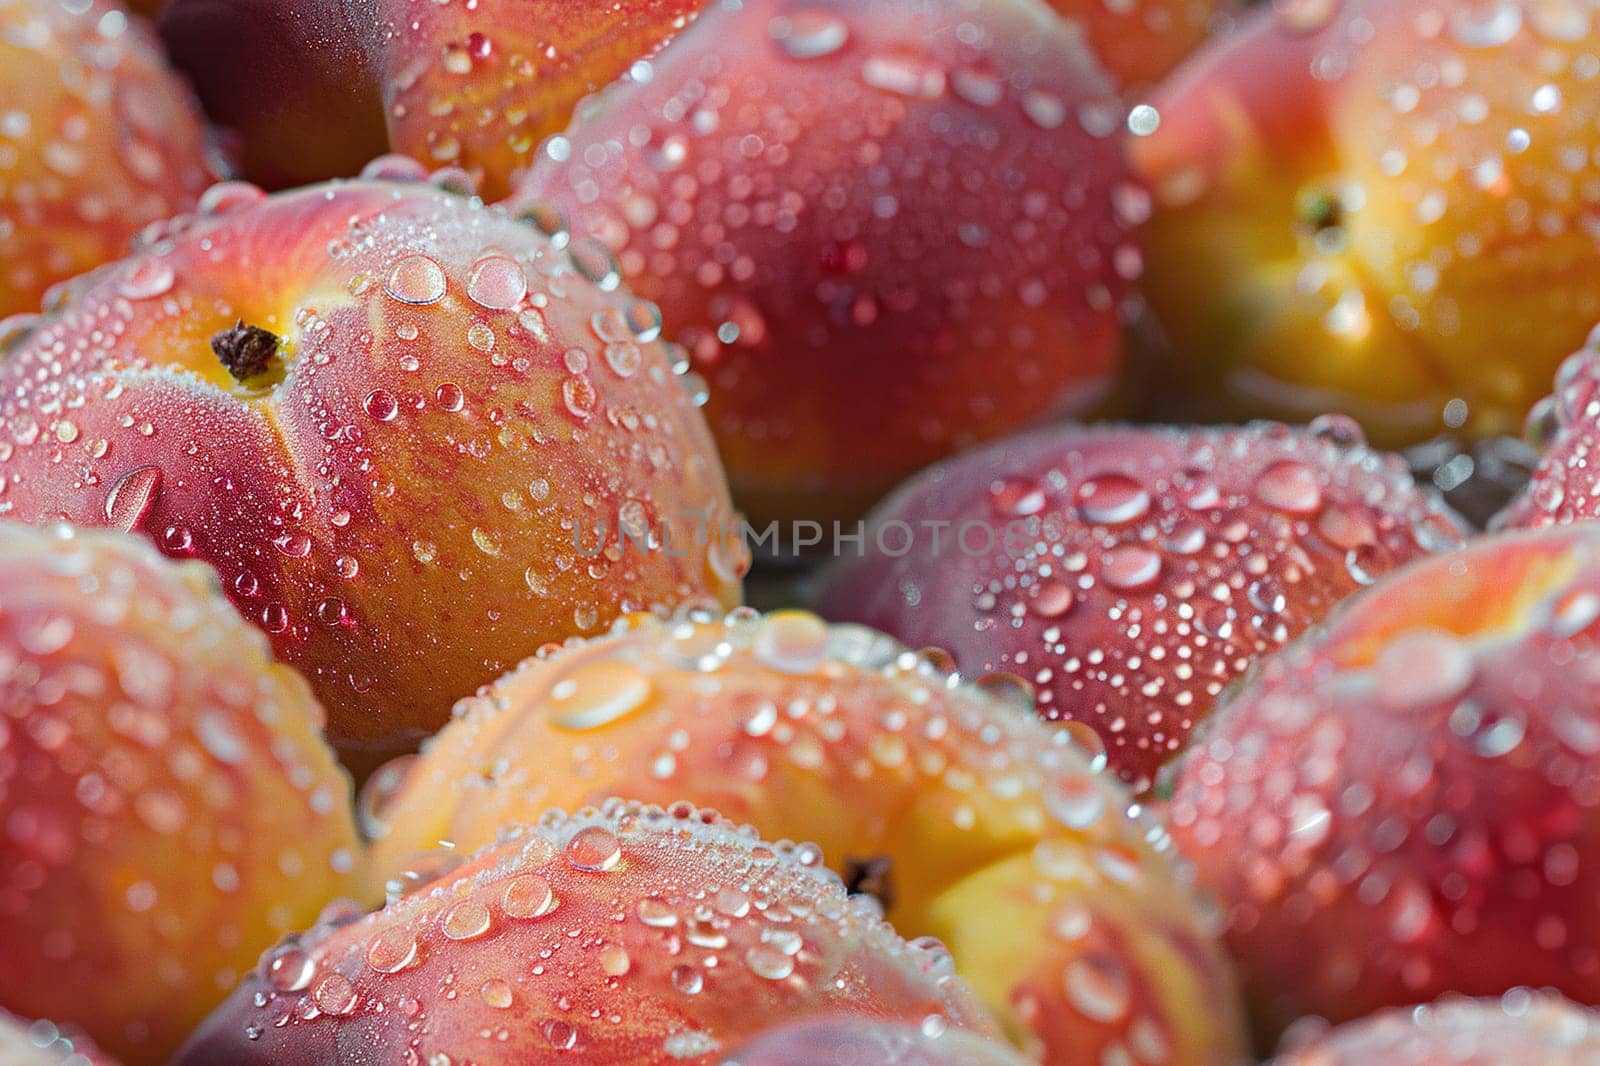 Appetizing ripe peaches in drops of water. Horizontal macro background